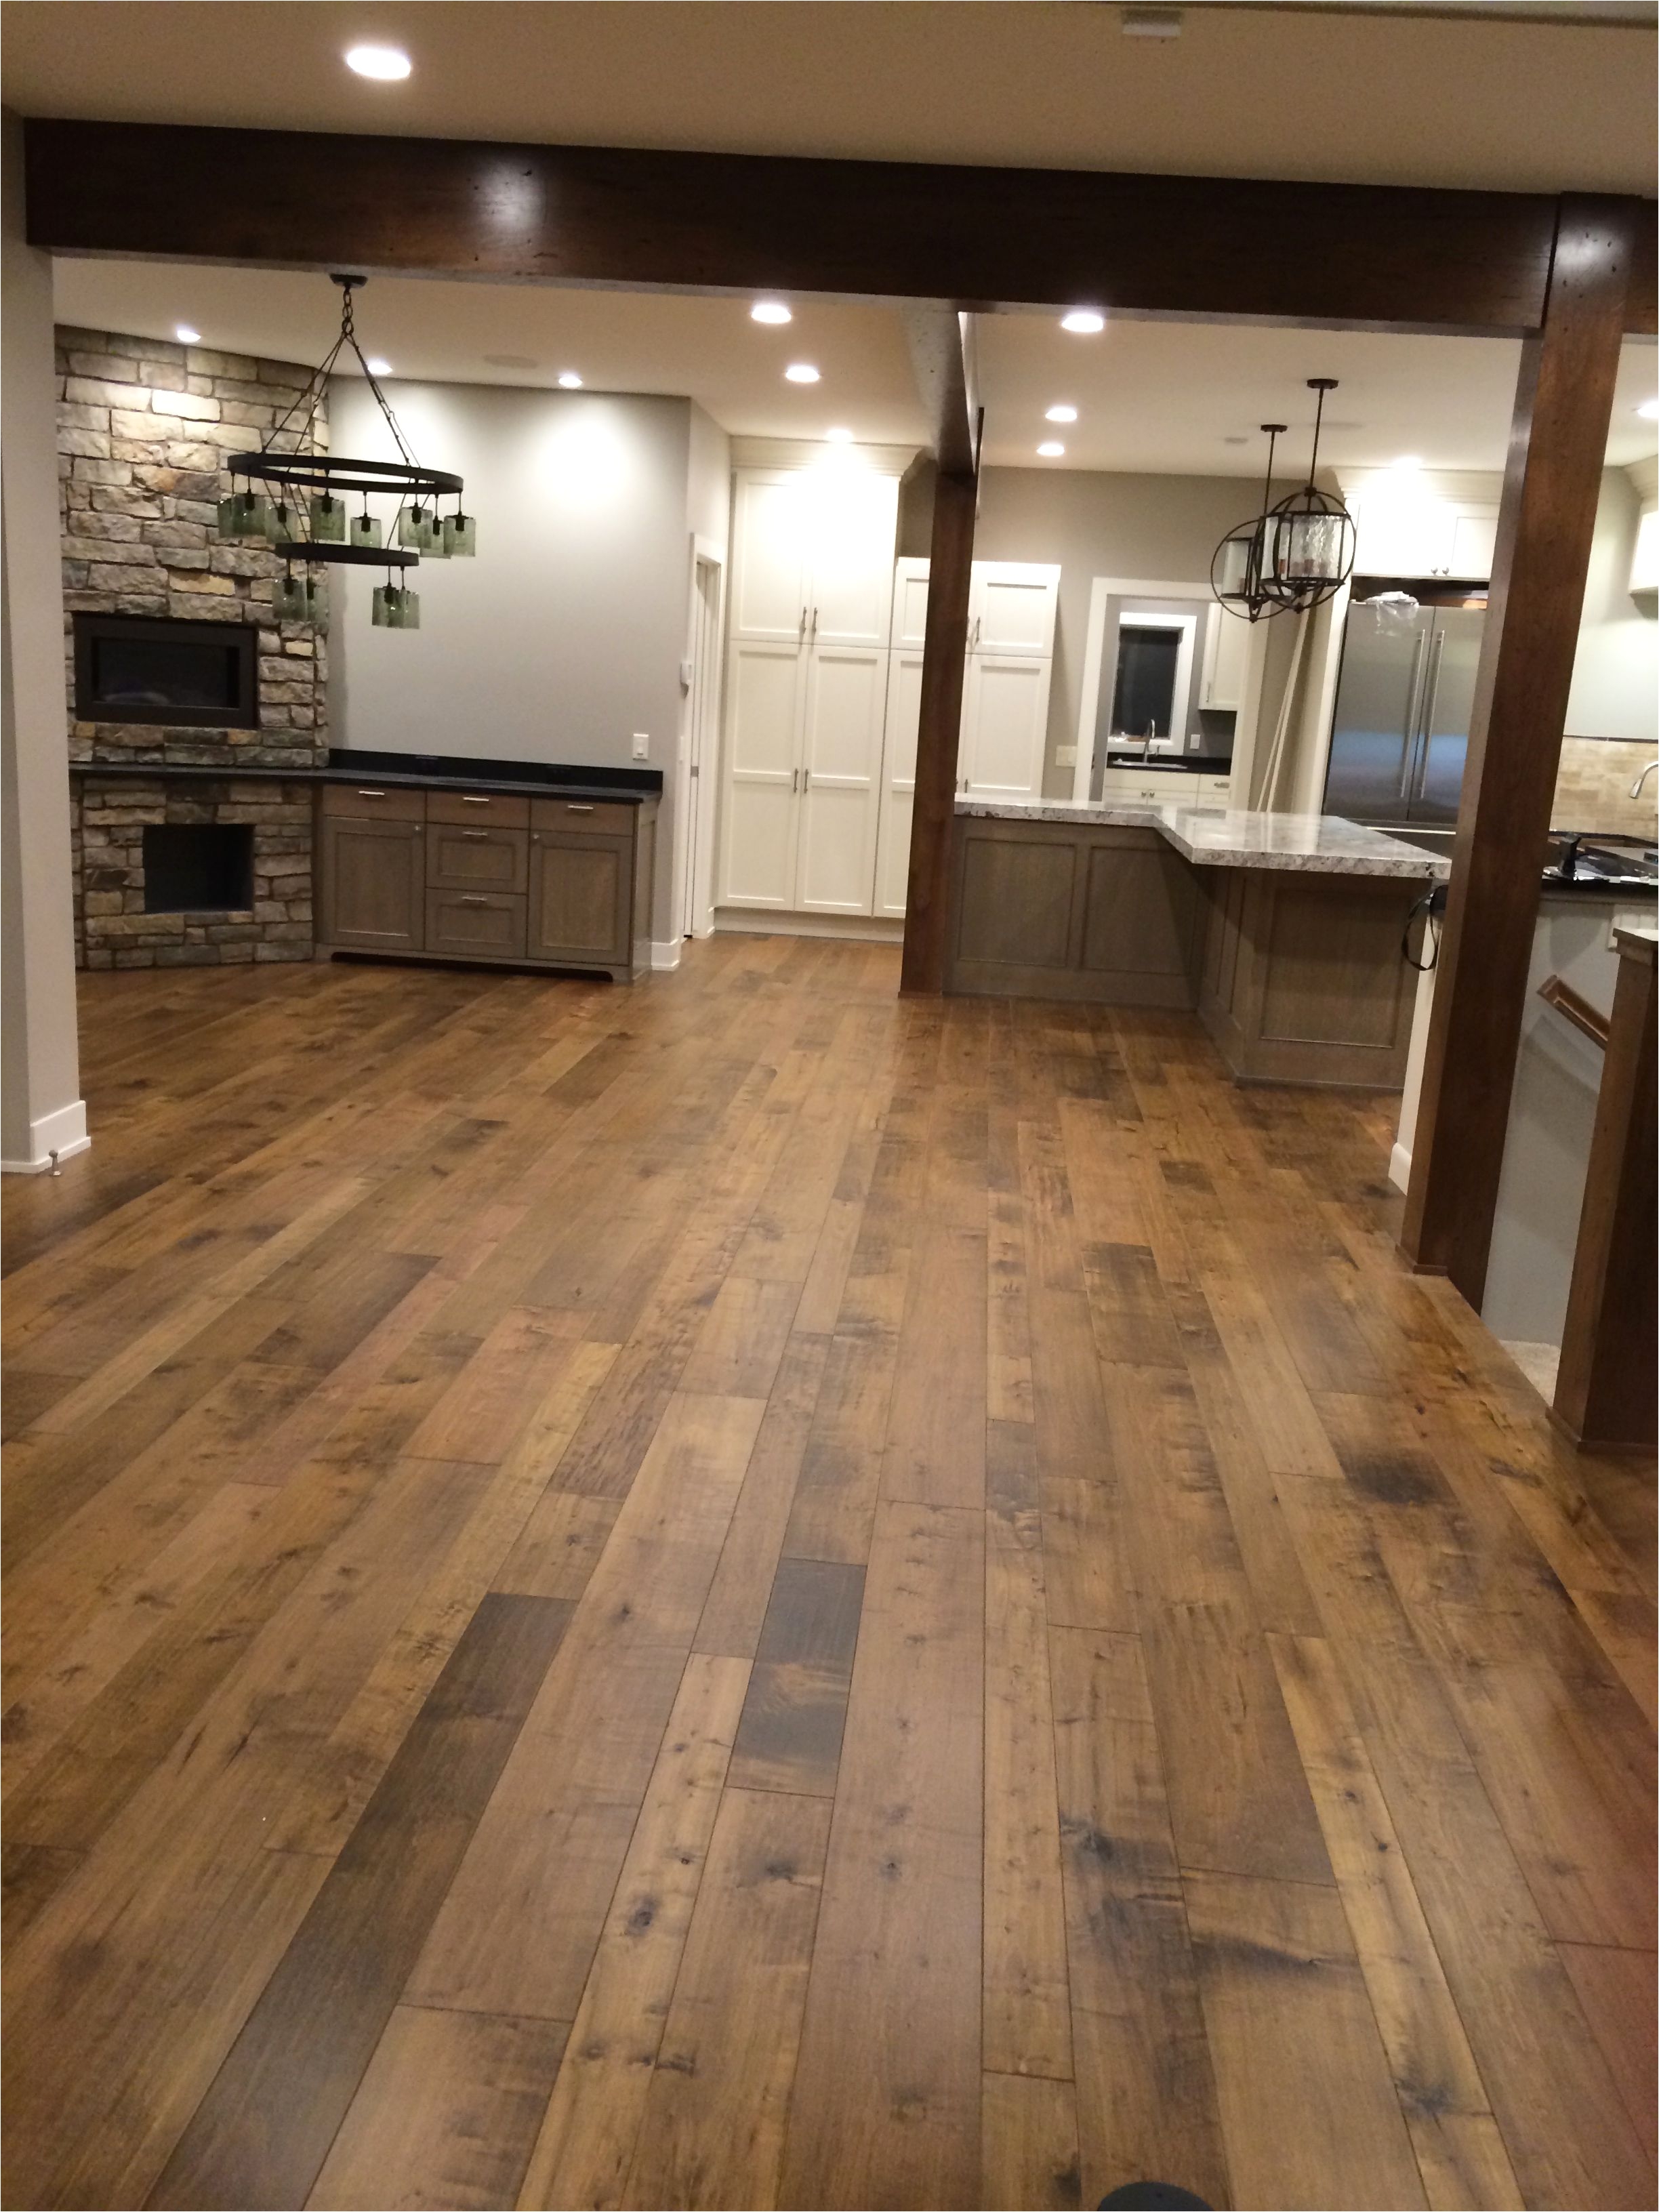 the floors were purchased from carpets direct and installed by fulton construction engineered hardwood flooring collection